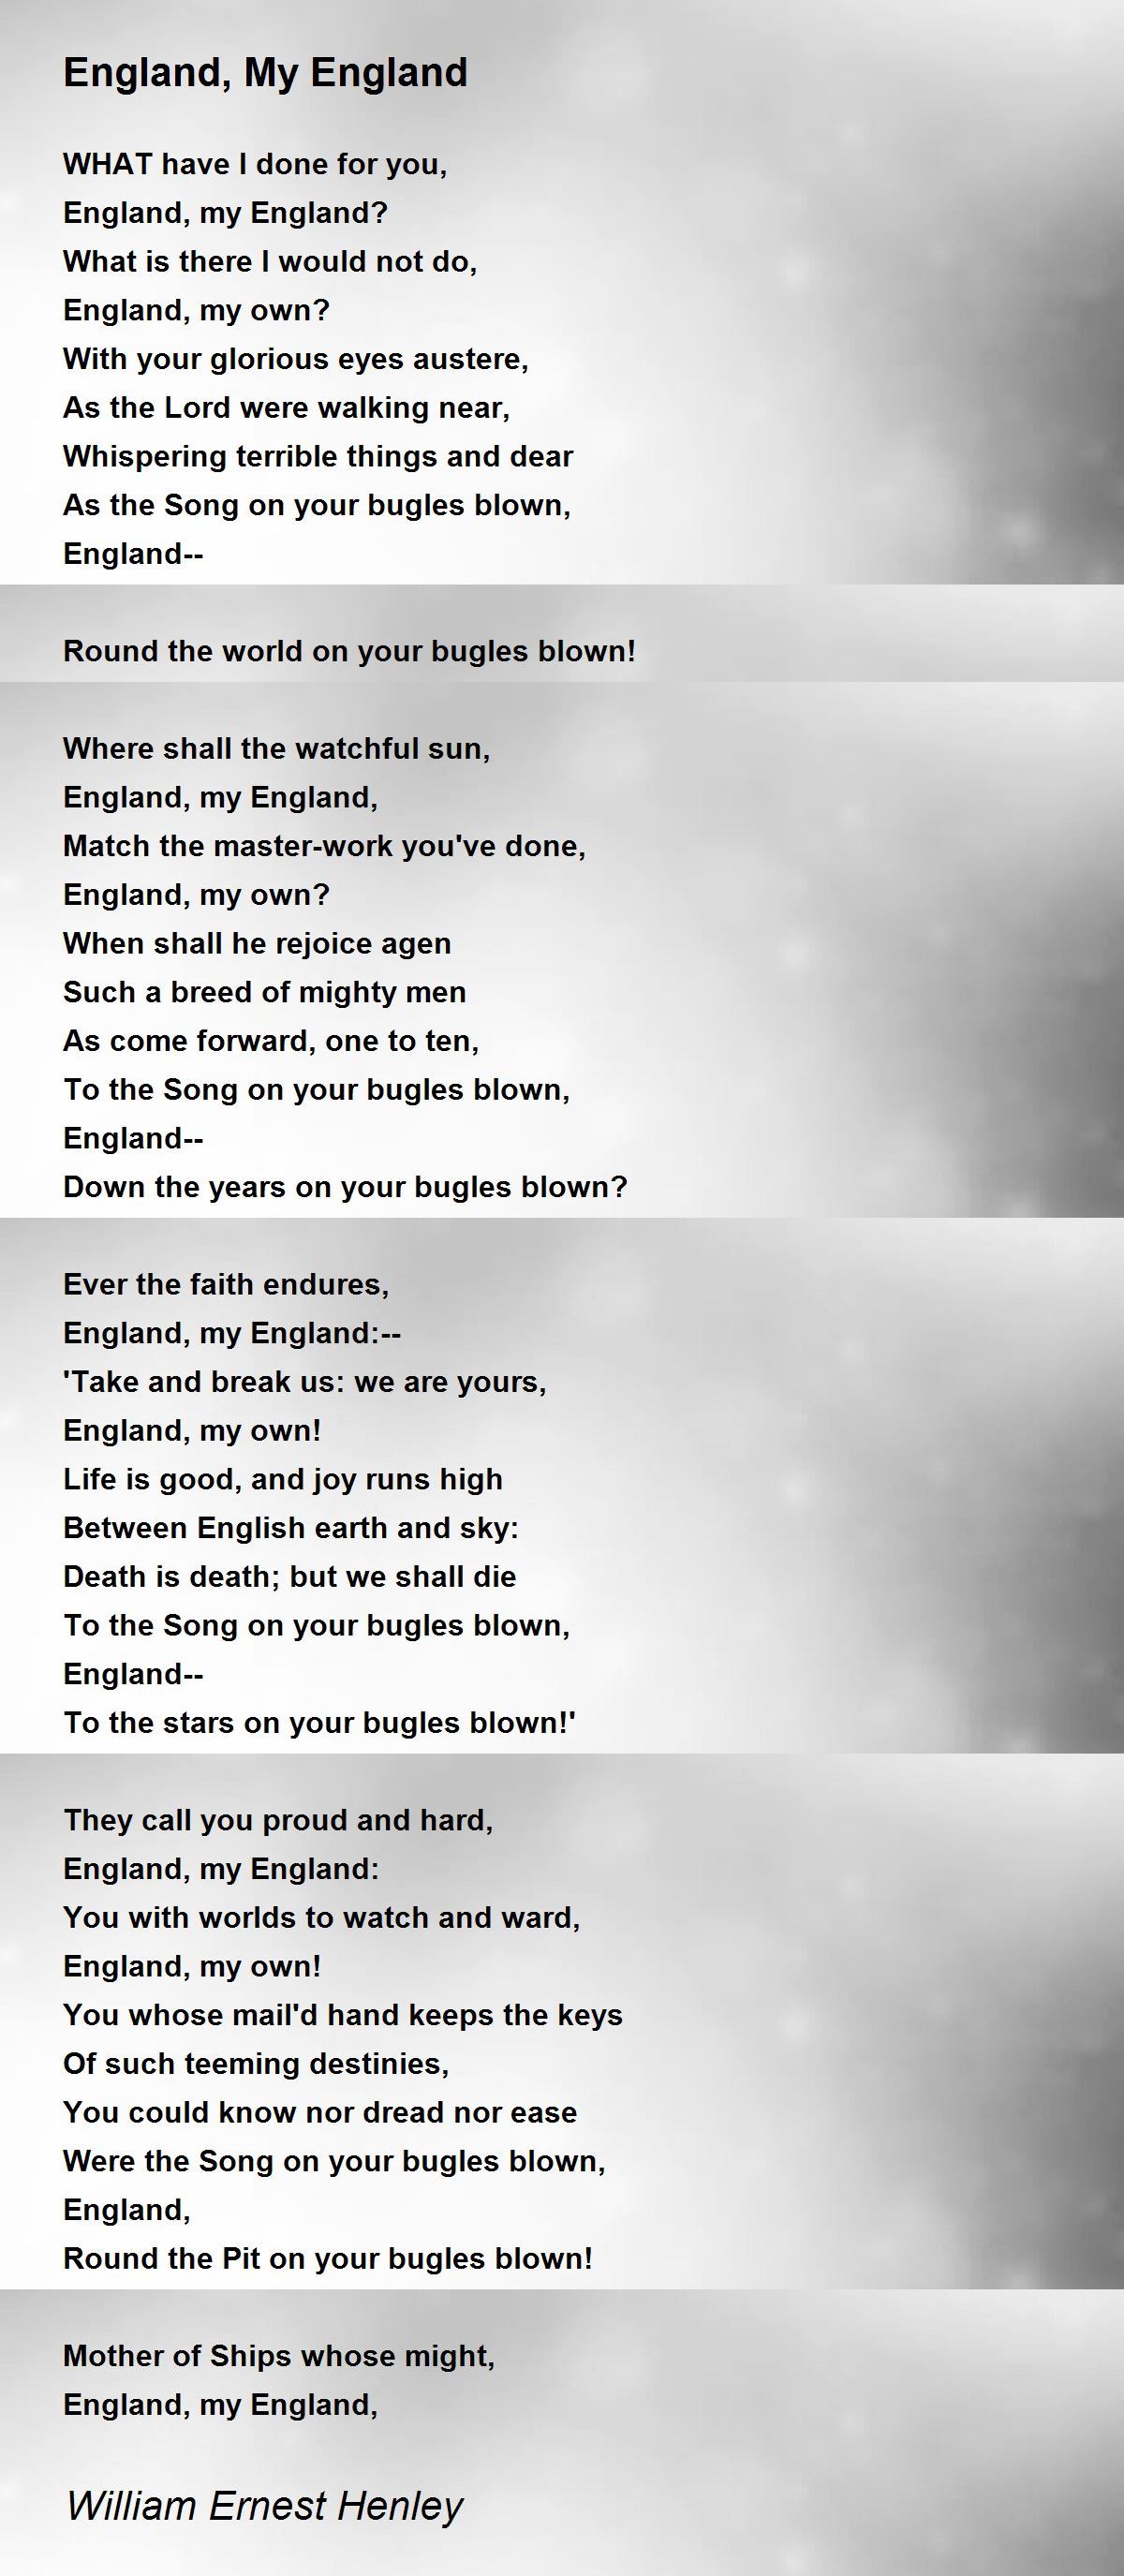 😊 My England Poem England In 1819 By Percy Bysshe Shelley 2019 02 25